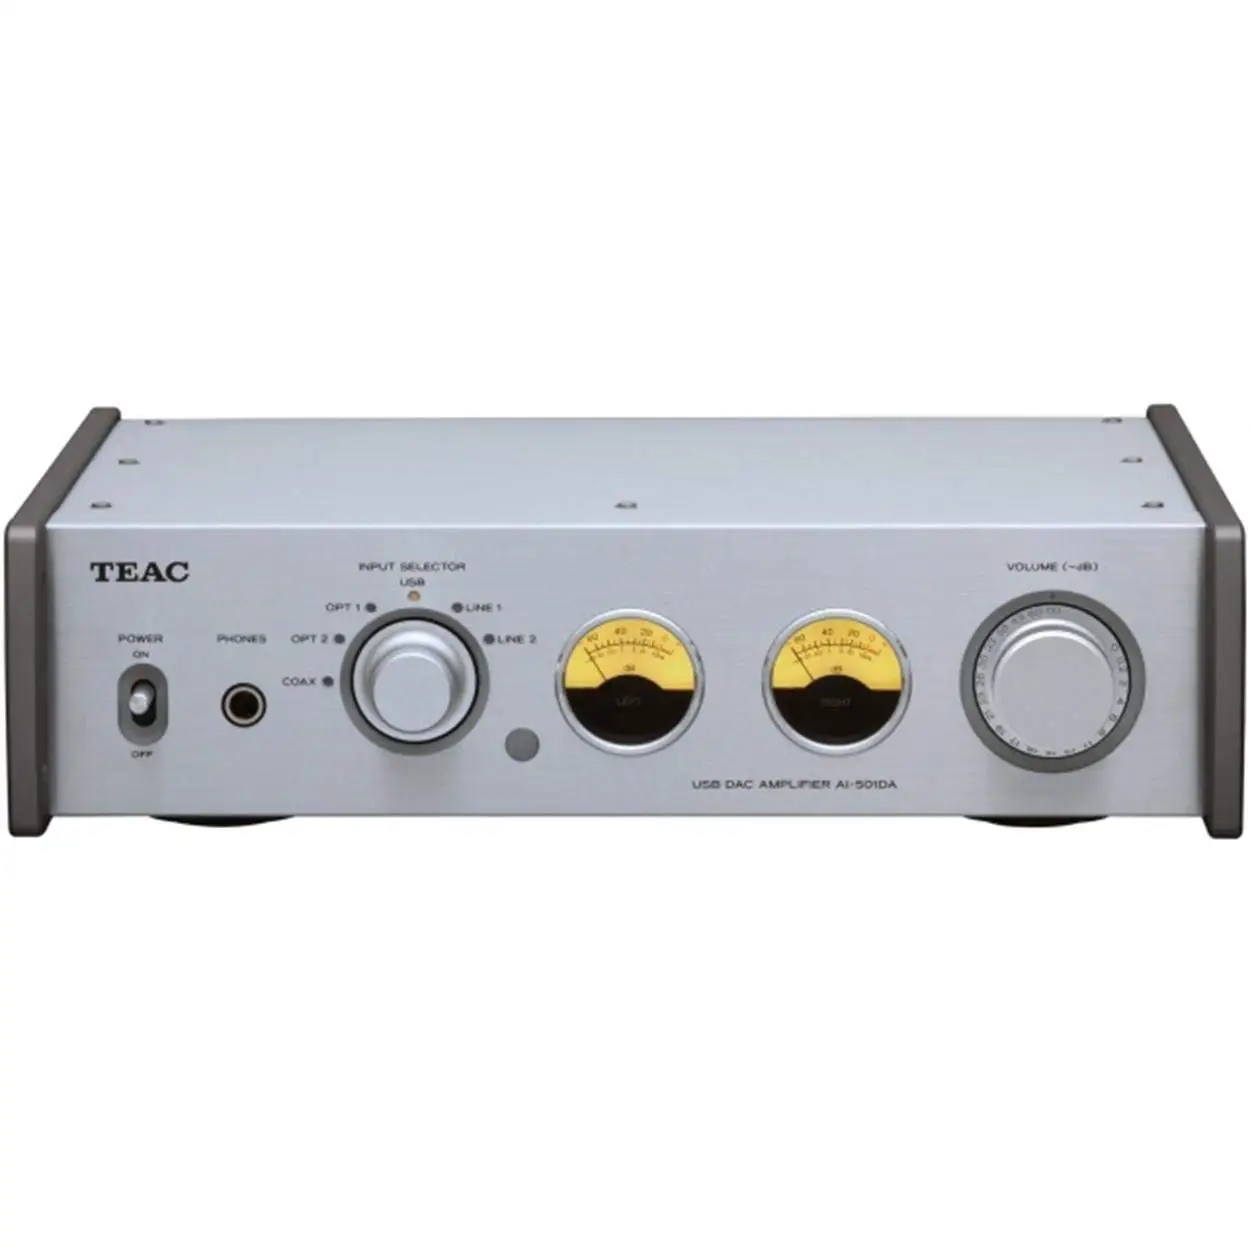 Buy Teac Ai 301da Bk Integrated Amplifier With Bluetooth Usb And Dac Black In Cheap Price On M Alibaba Com